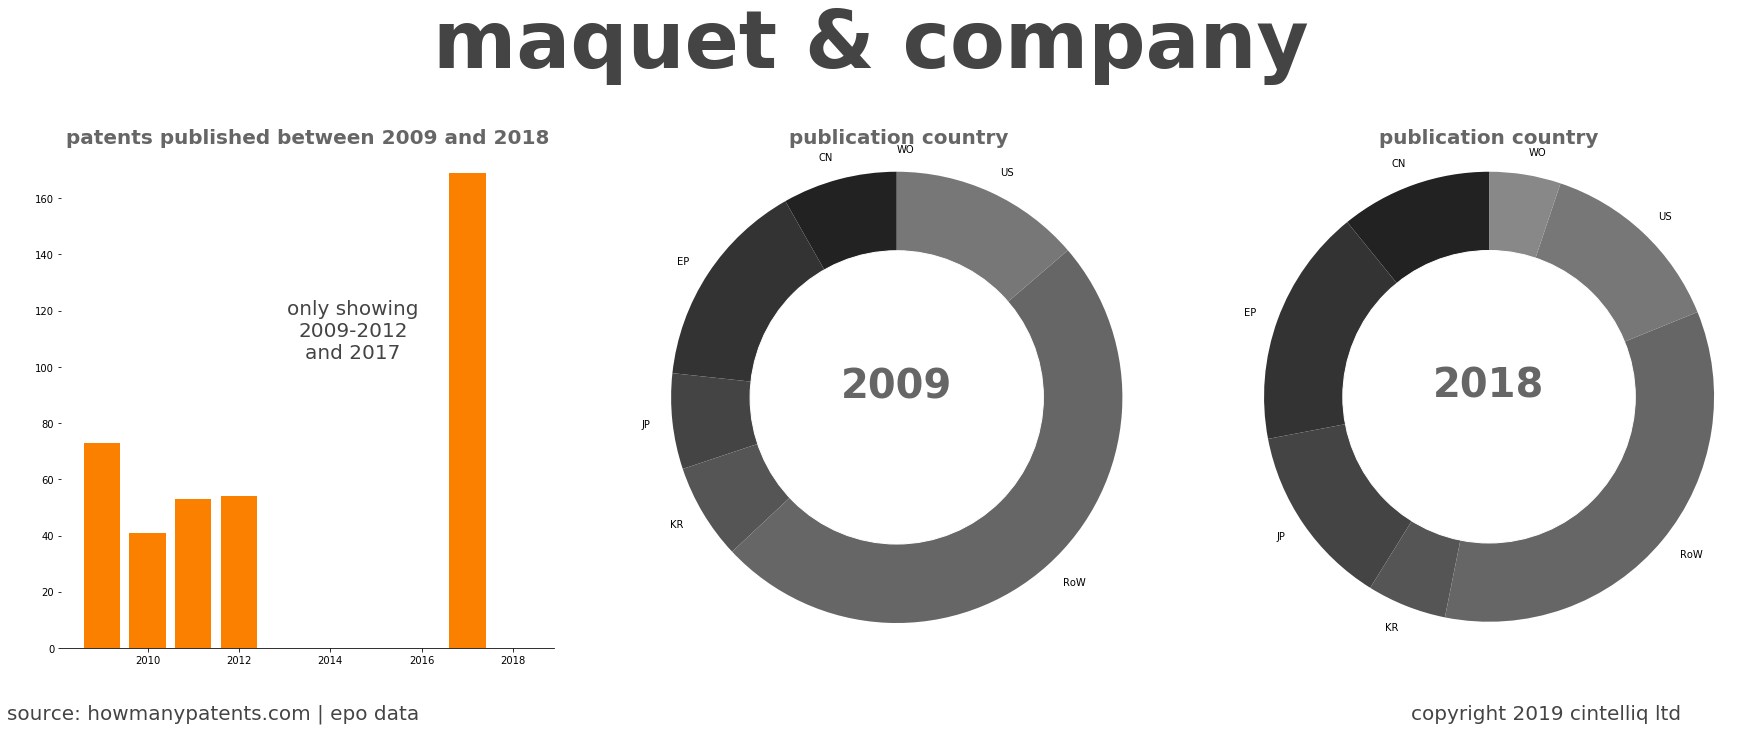 summary of patents for Maquet & Company